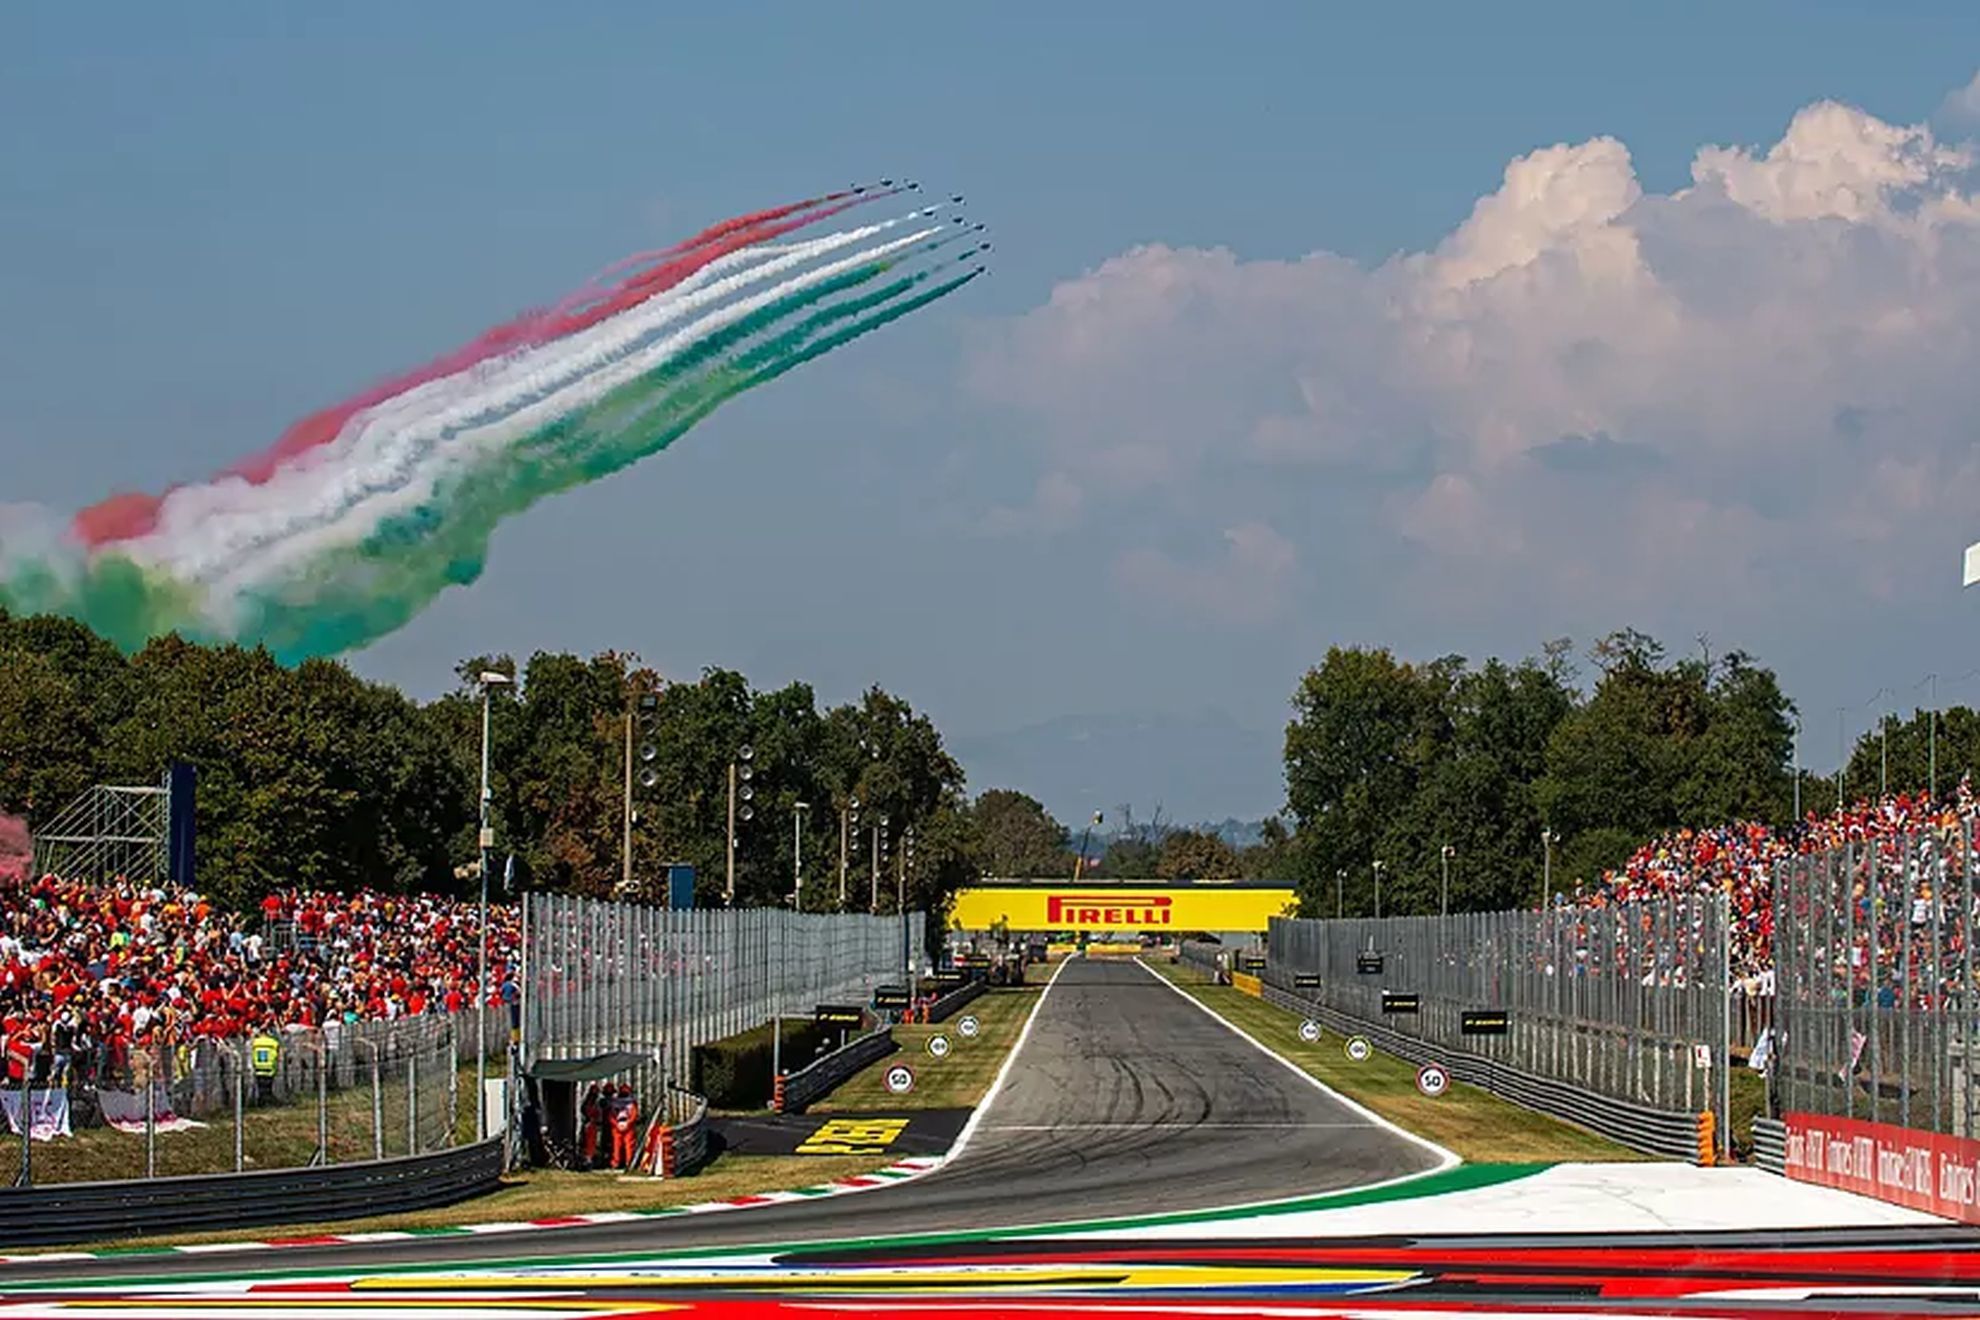 Take note of the schedule for the Italian Grand Prix at Monza